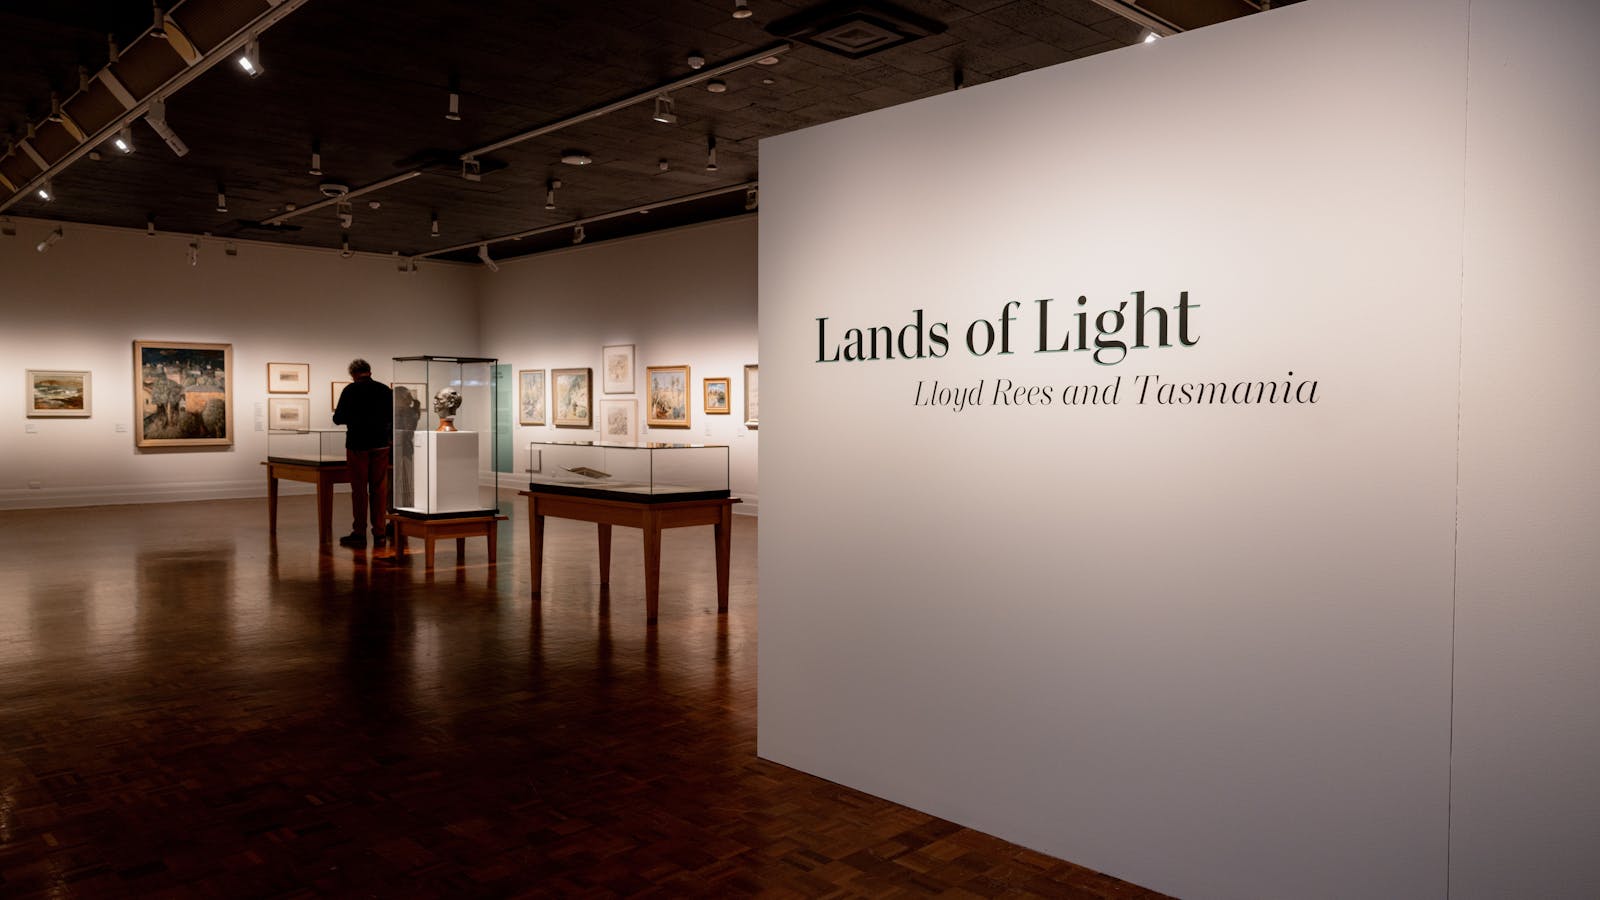 Lands of Light Lloyd Rees and Tasmania Exhibition Installation view